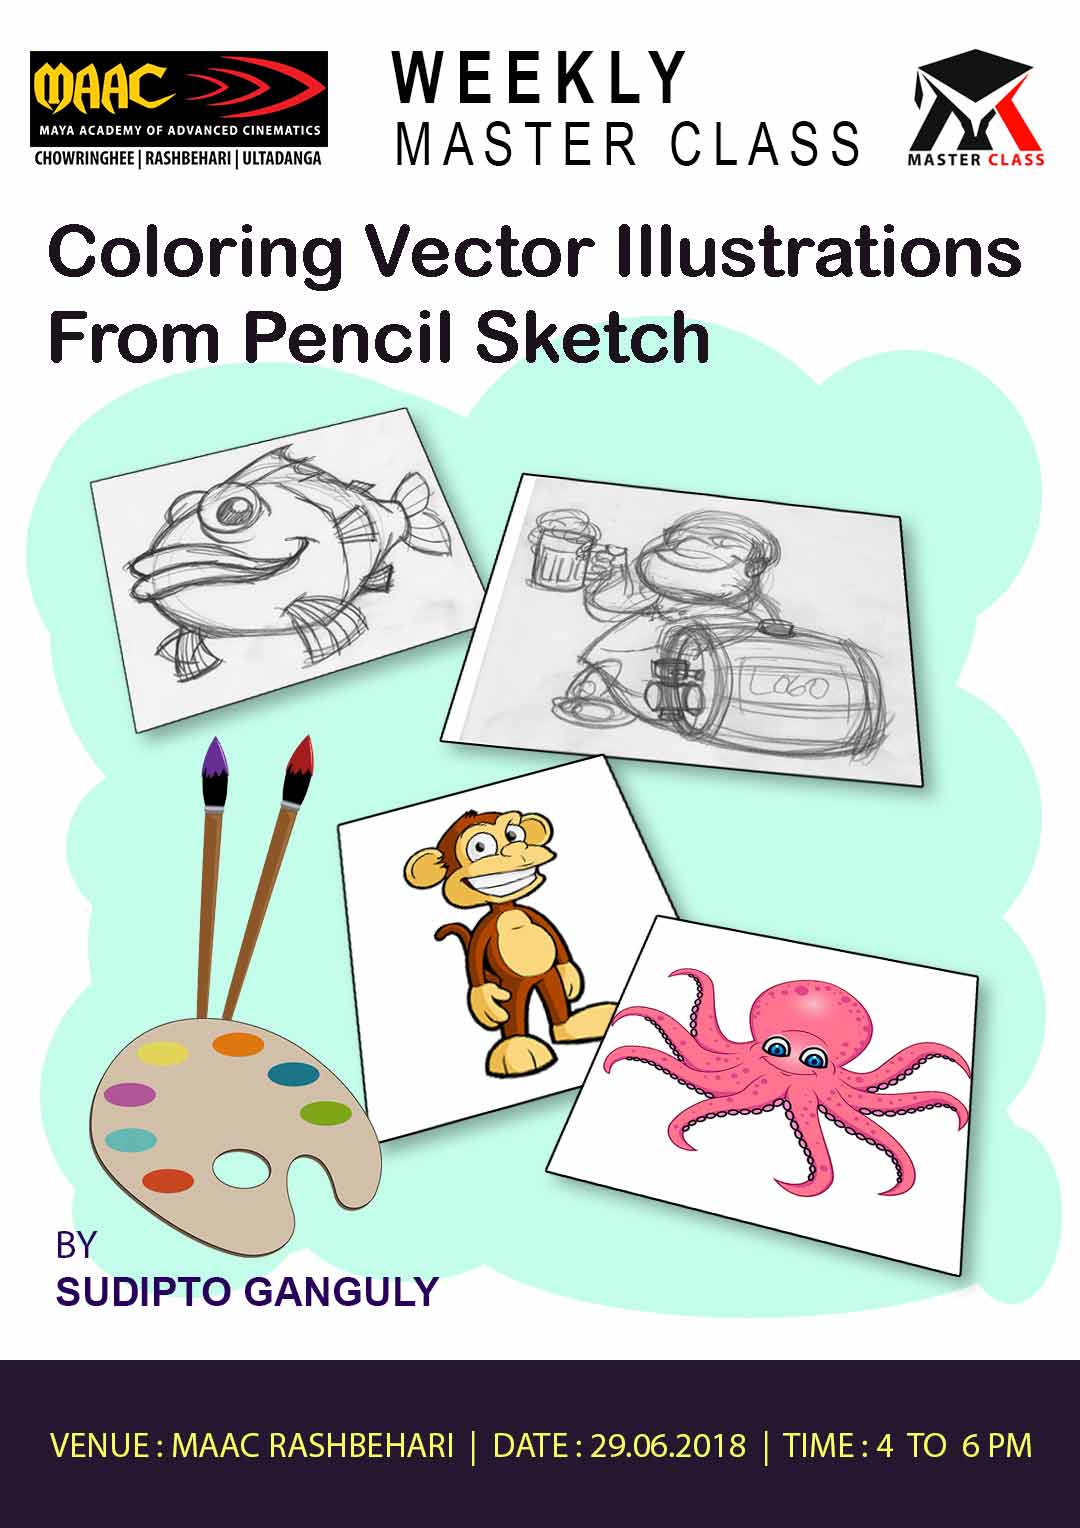 Weekly Master Class on Coloring Vector Illustrations from Pencil